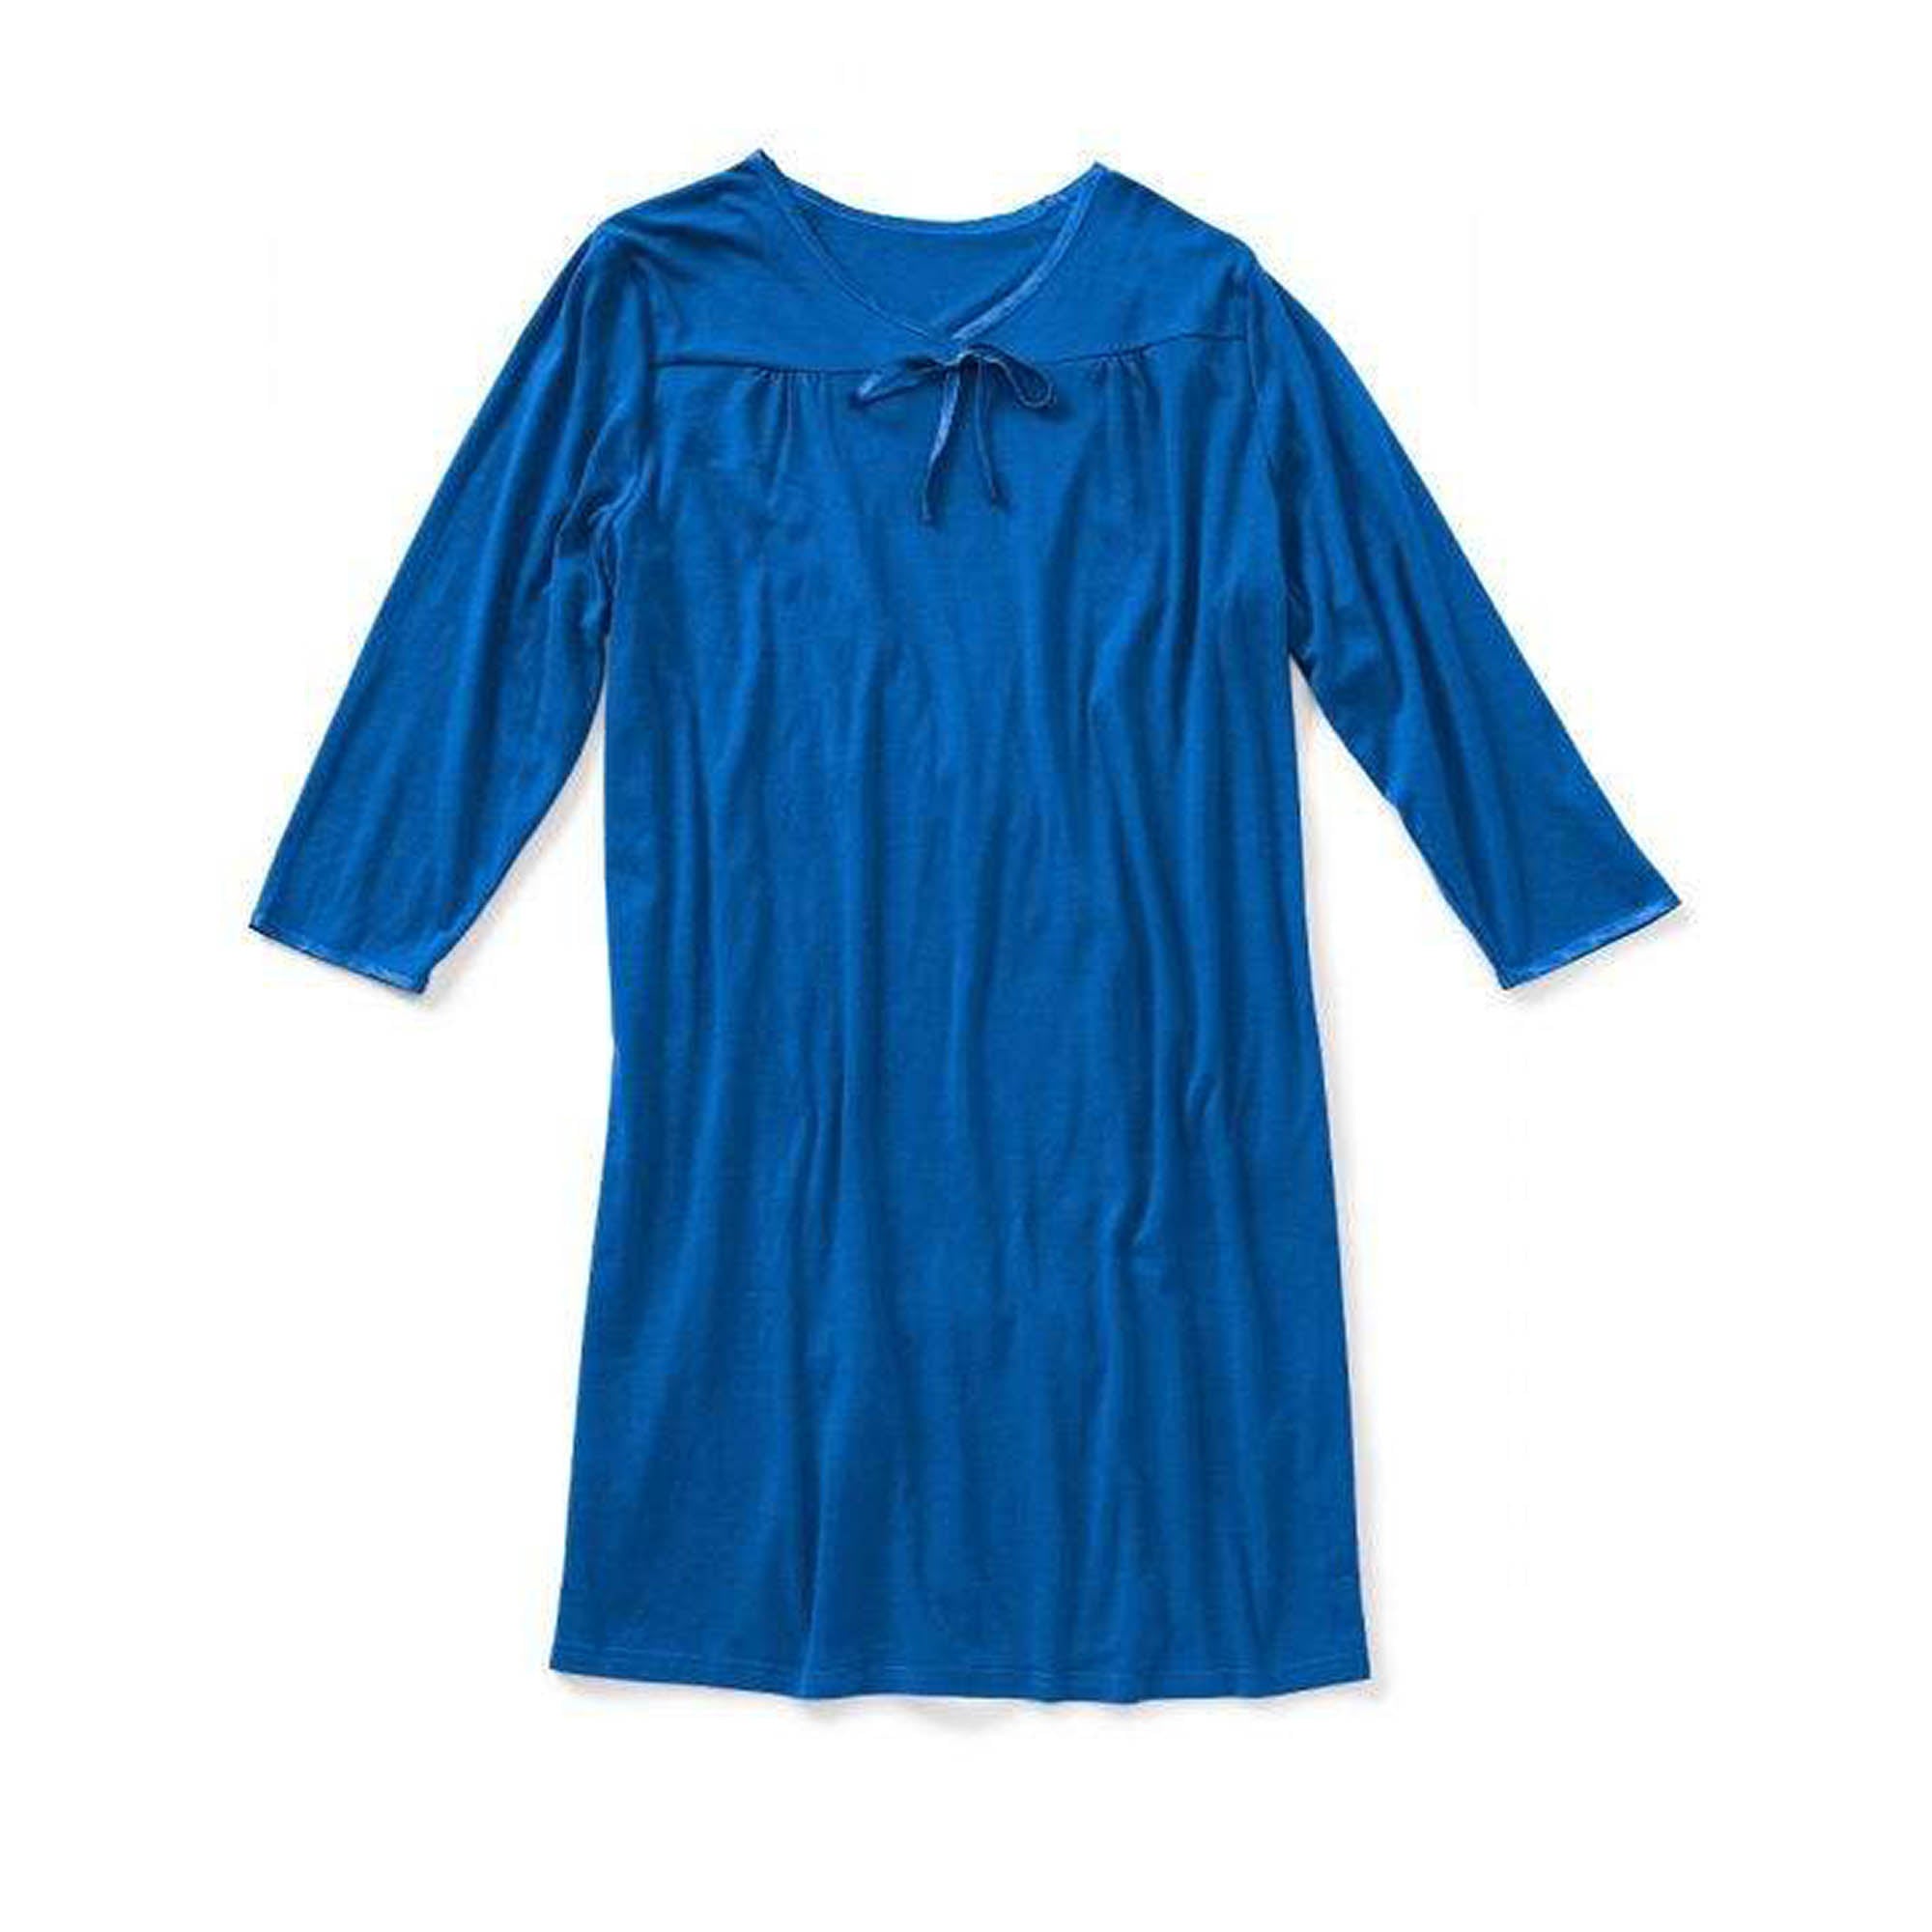 Silverts Women's Open Back Antimicrobial Long-sleeve Nightgown - Adaptive Clothing - Blue - XS